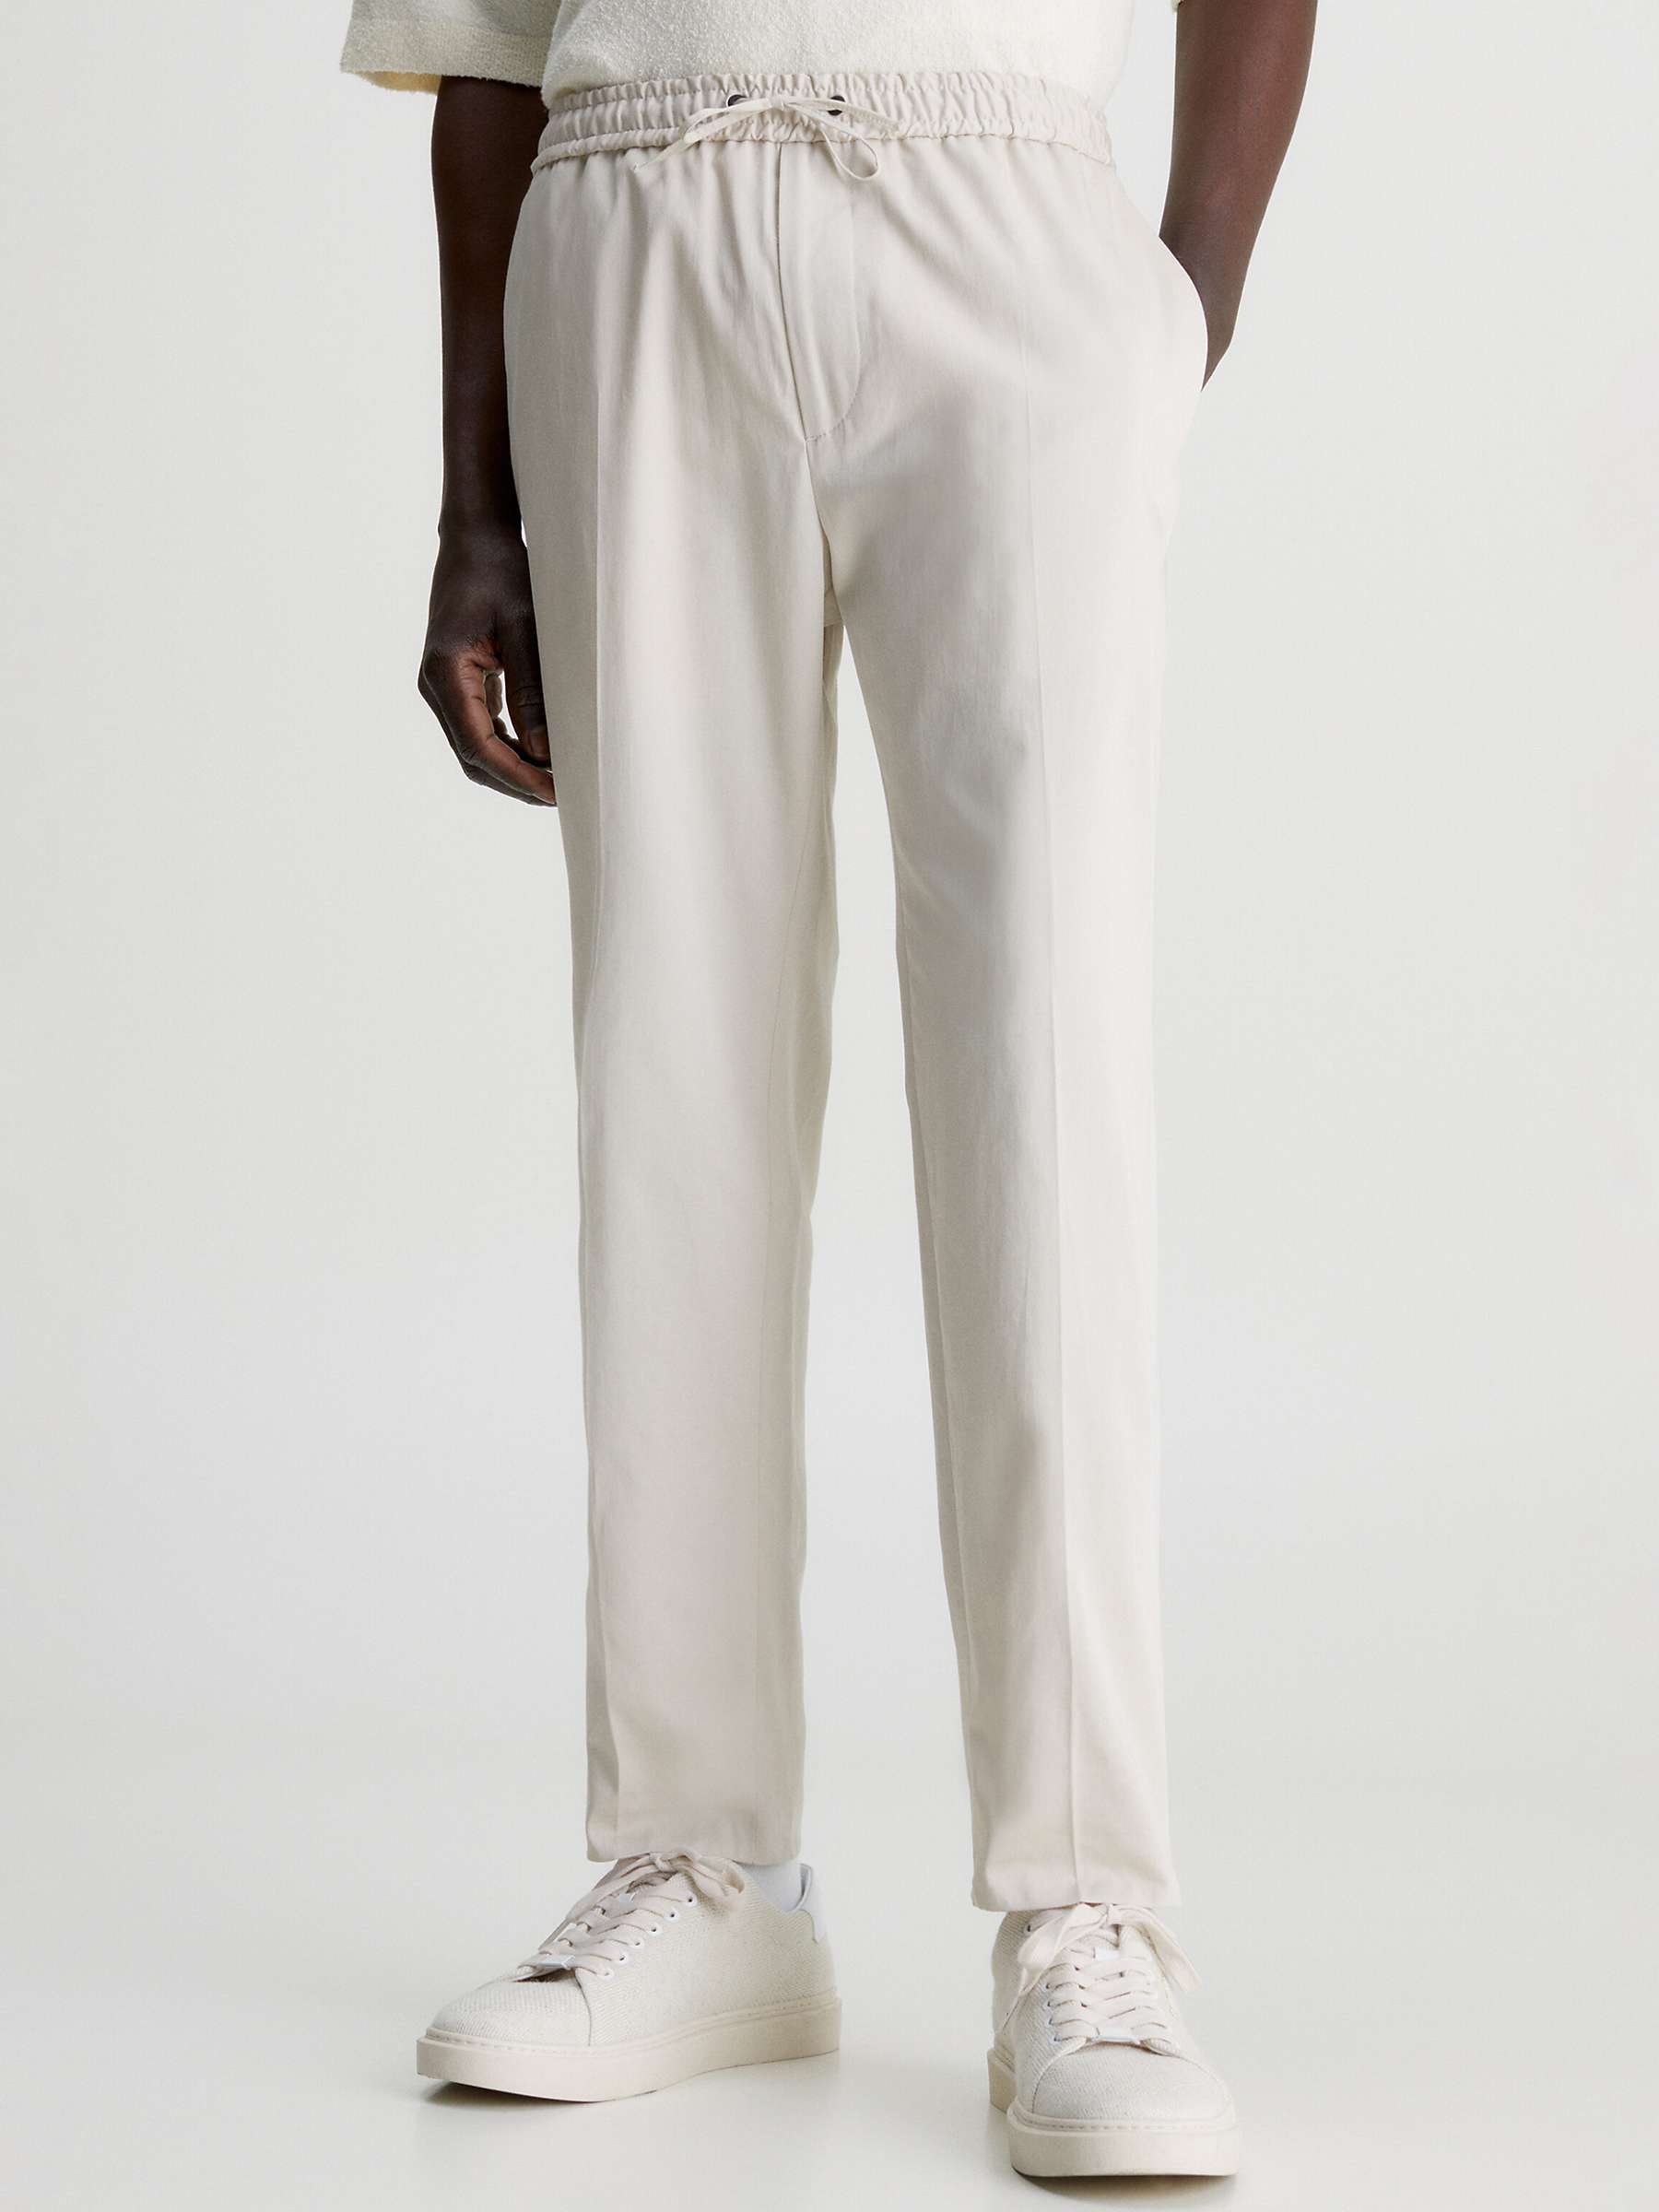 Buy Calvin Klein Stretch Sateen Jogger Trousers, Stony Beige Online at johnlewis.com